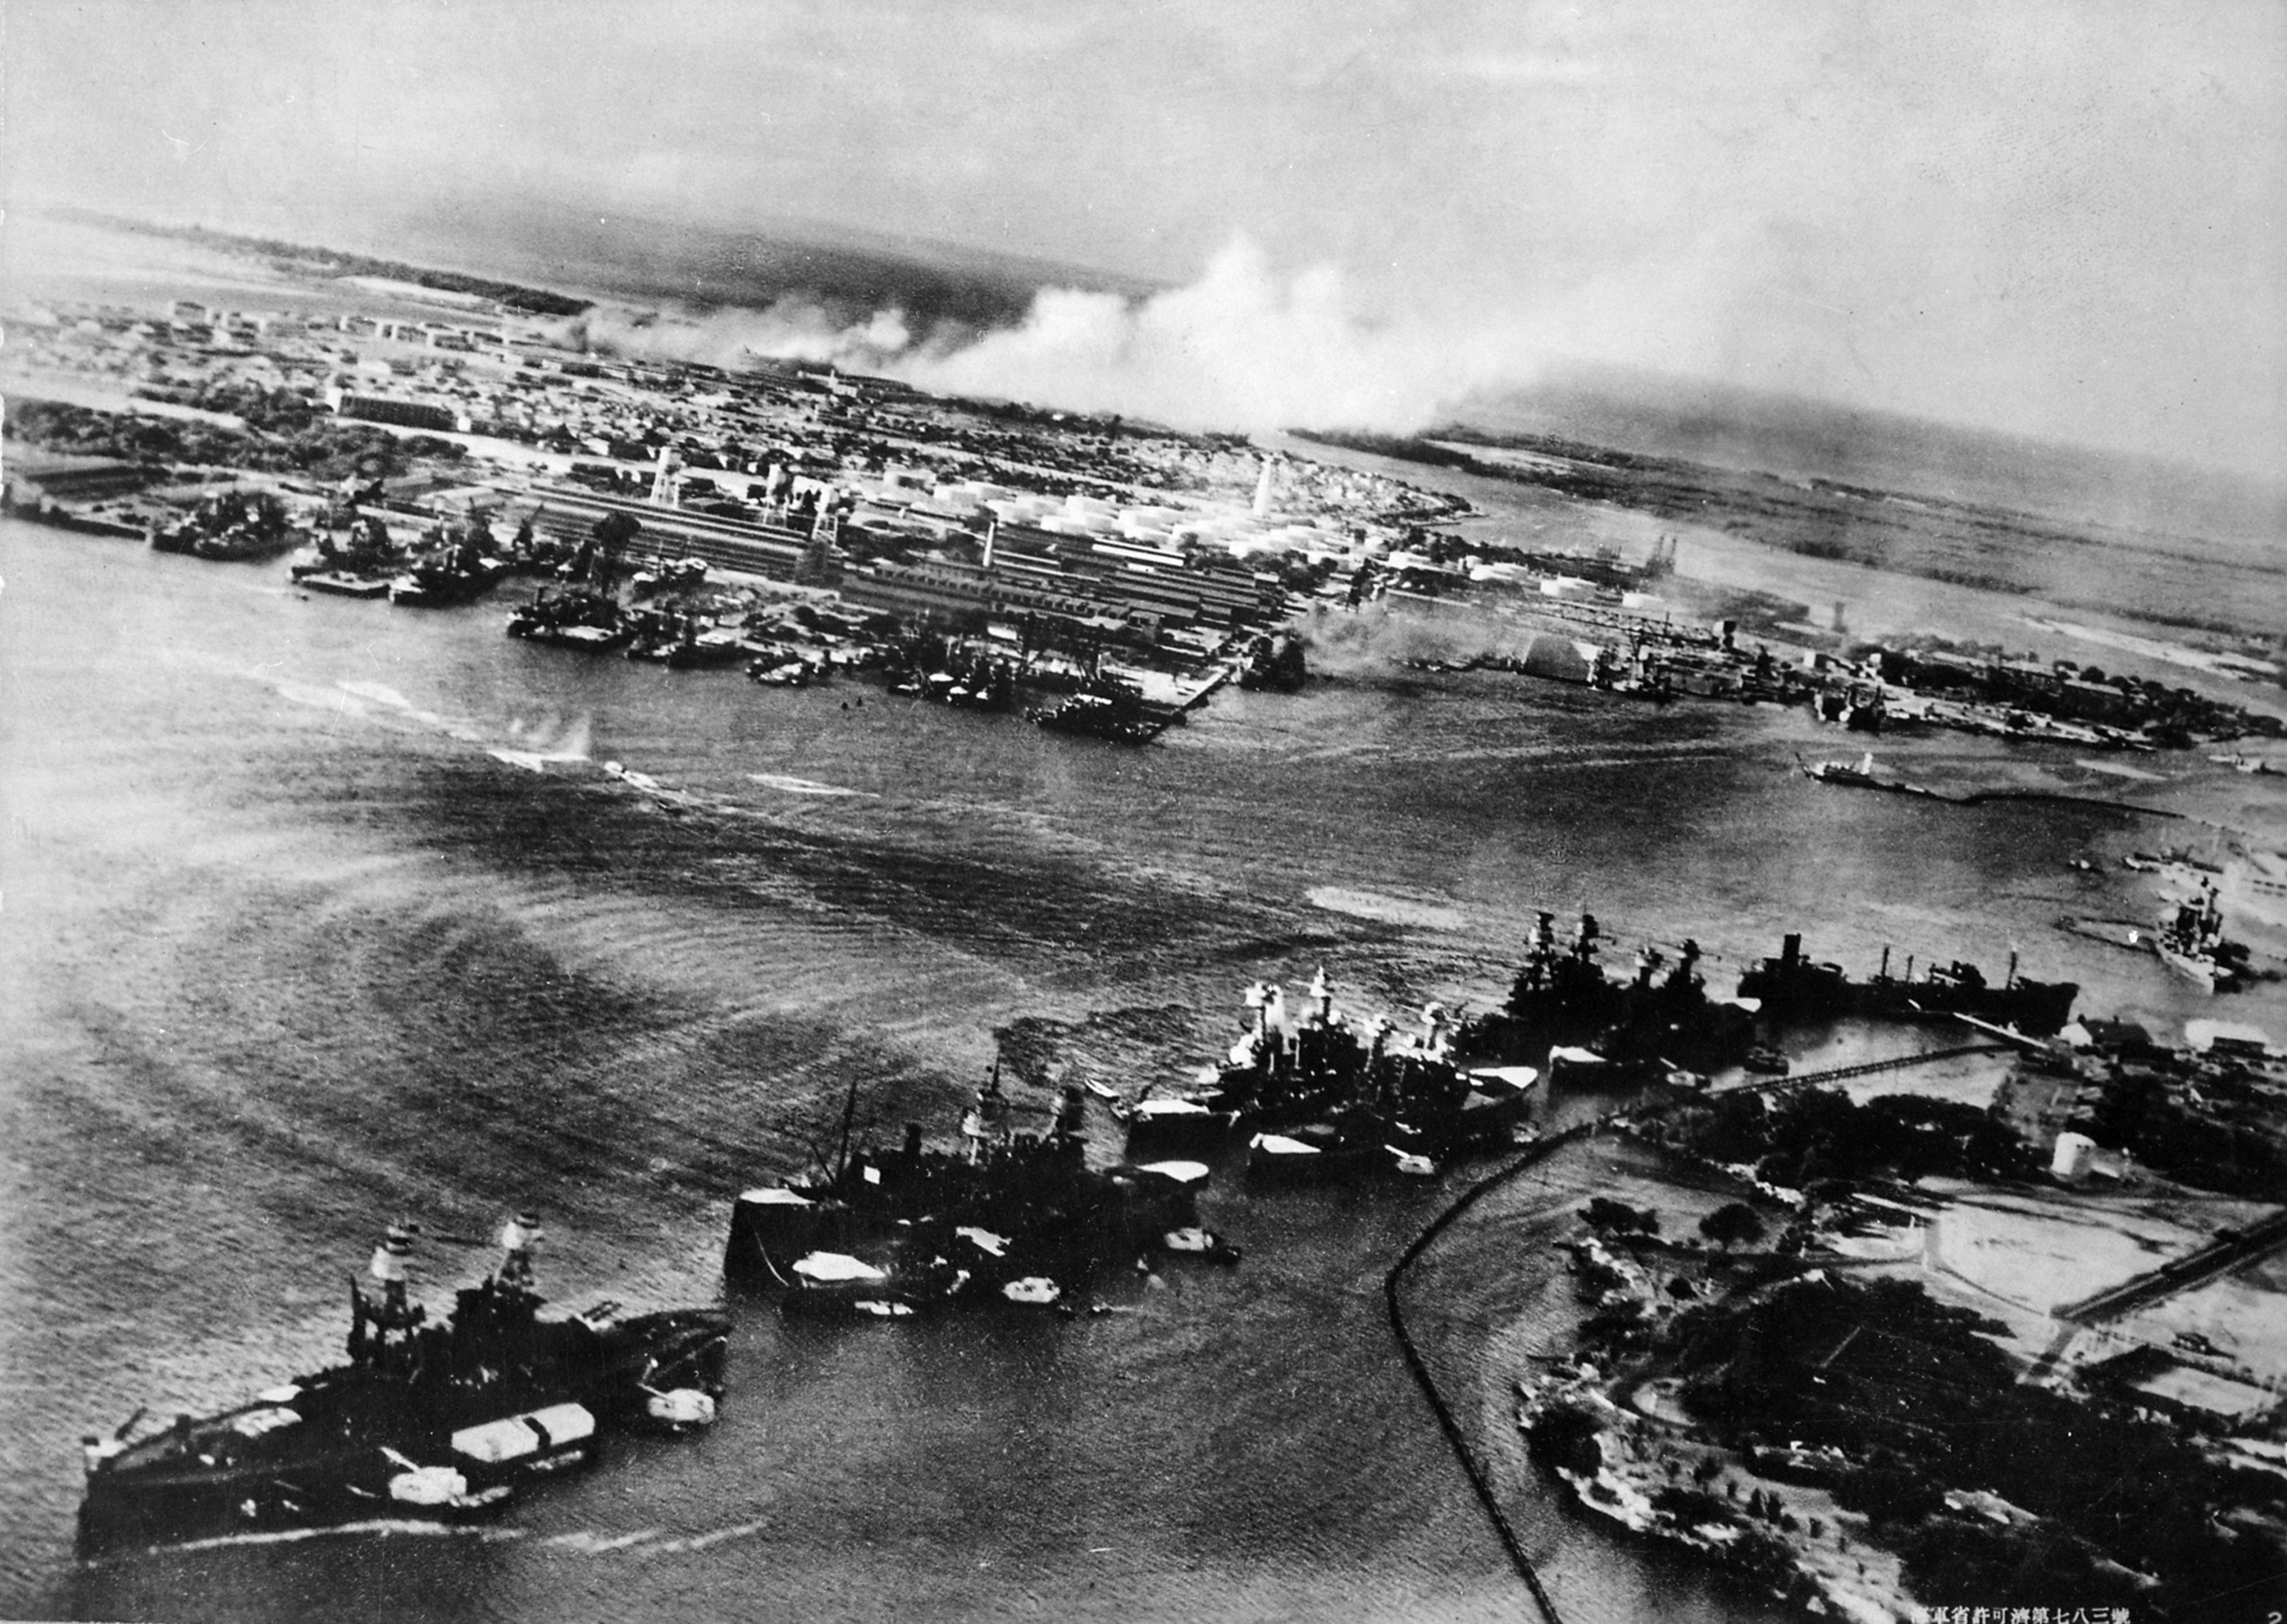 Attack on 'Battleship Row' of Pearl Harbor, seen from a Japanese aircraft, 7 Dec 1941